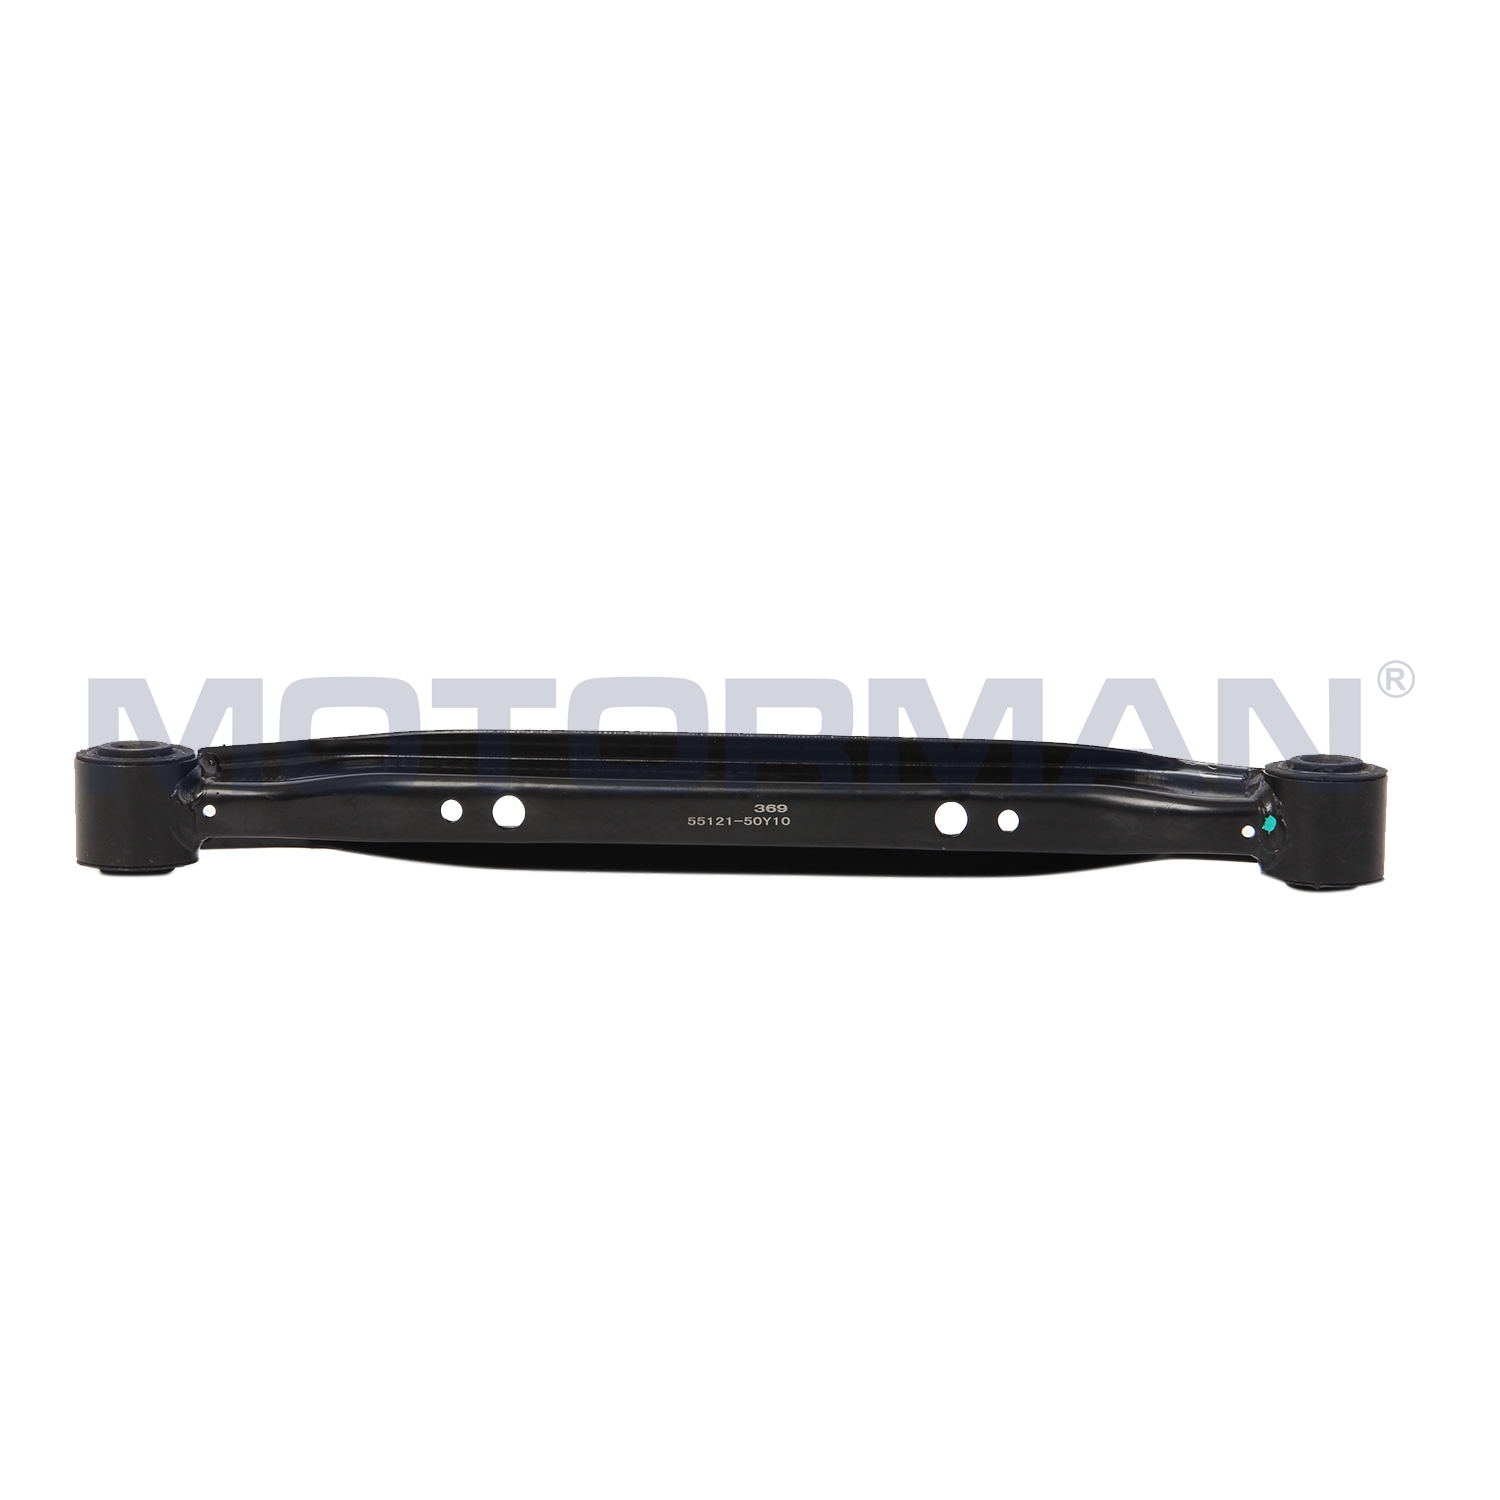 Parts control arm for NISSAN SENTRA 